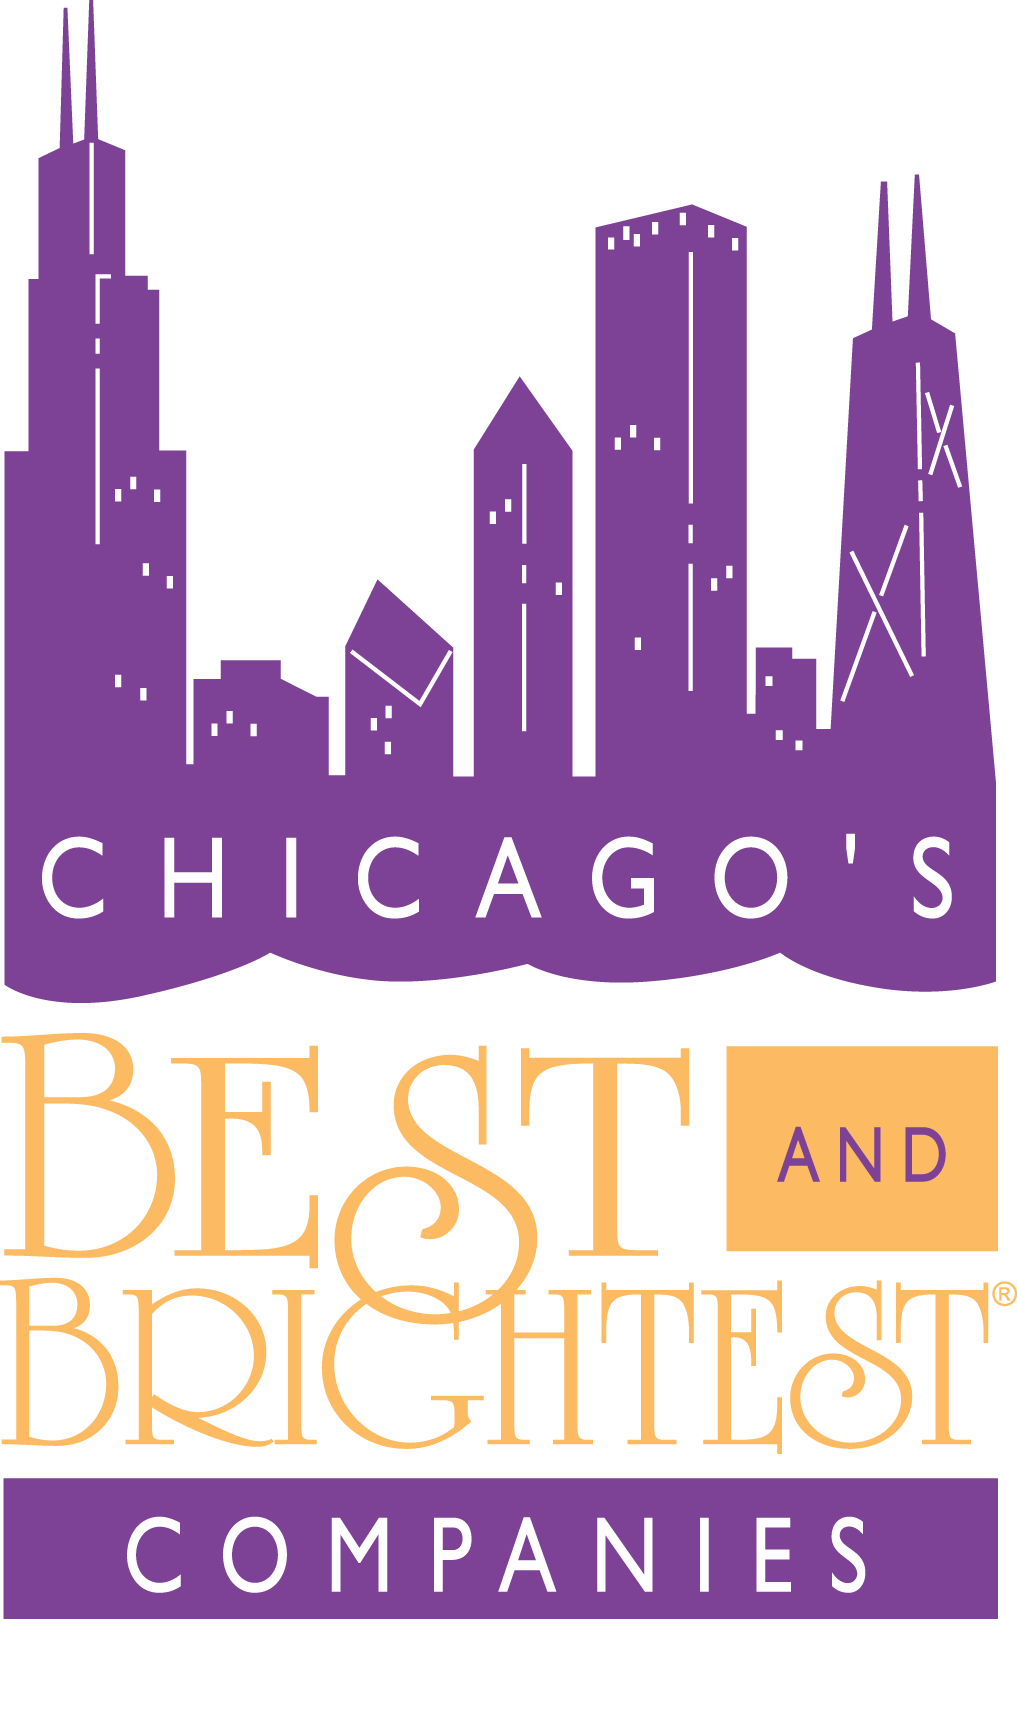 Chicago's Best and Brightest Companies Logo